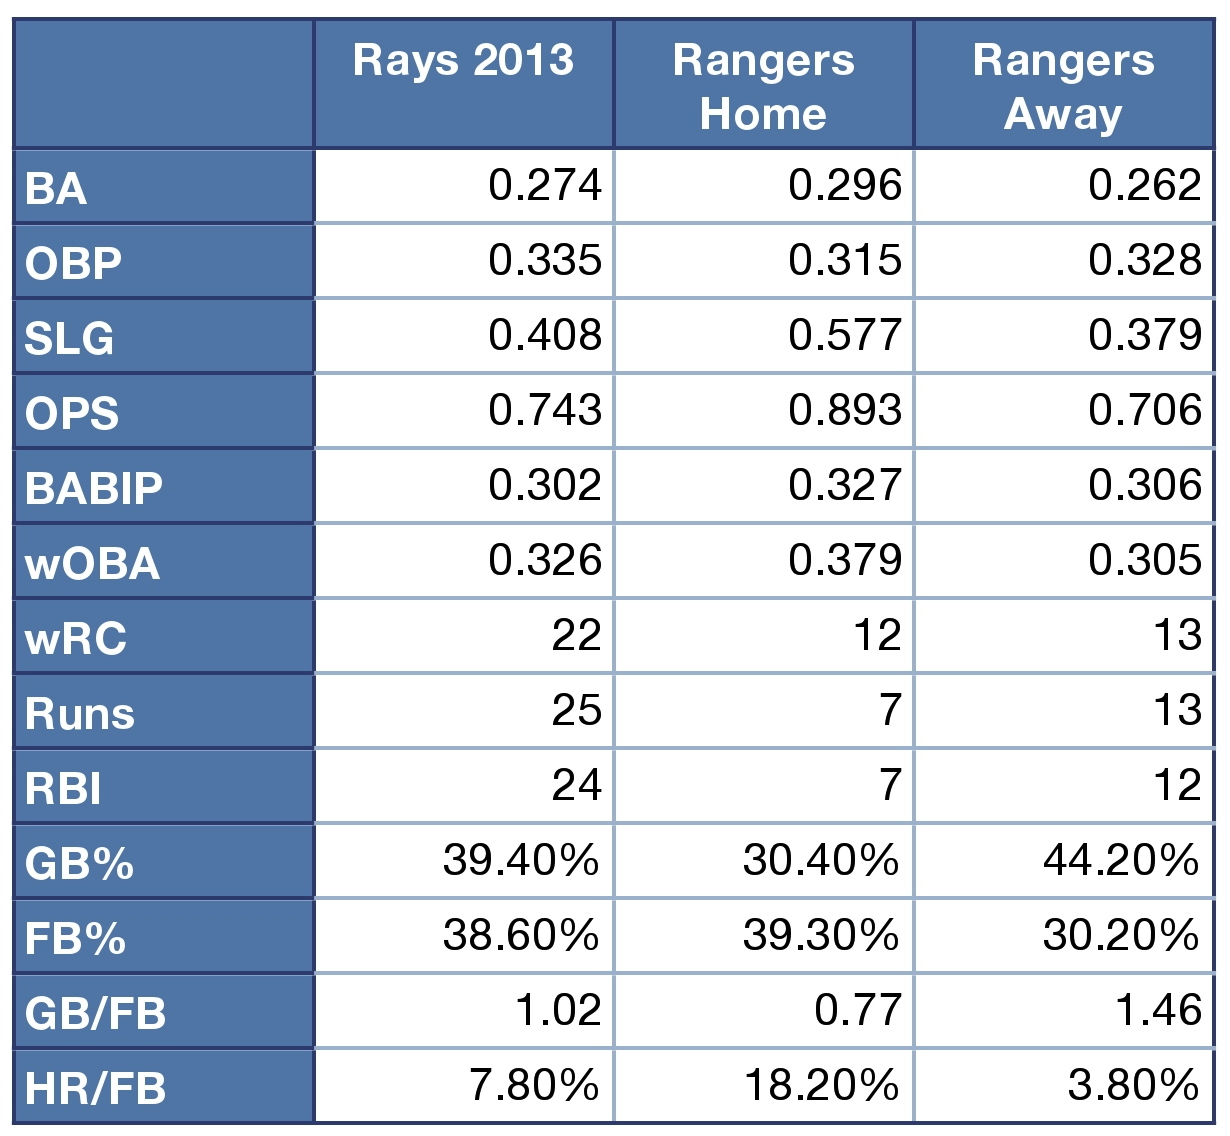 Rays and Rangers offensive numbers.